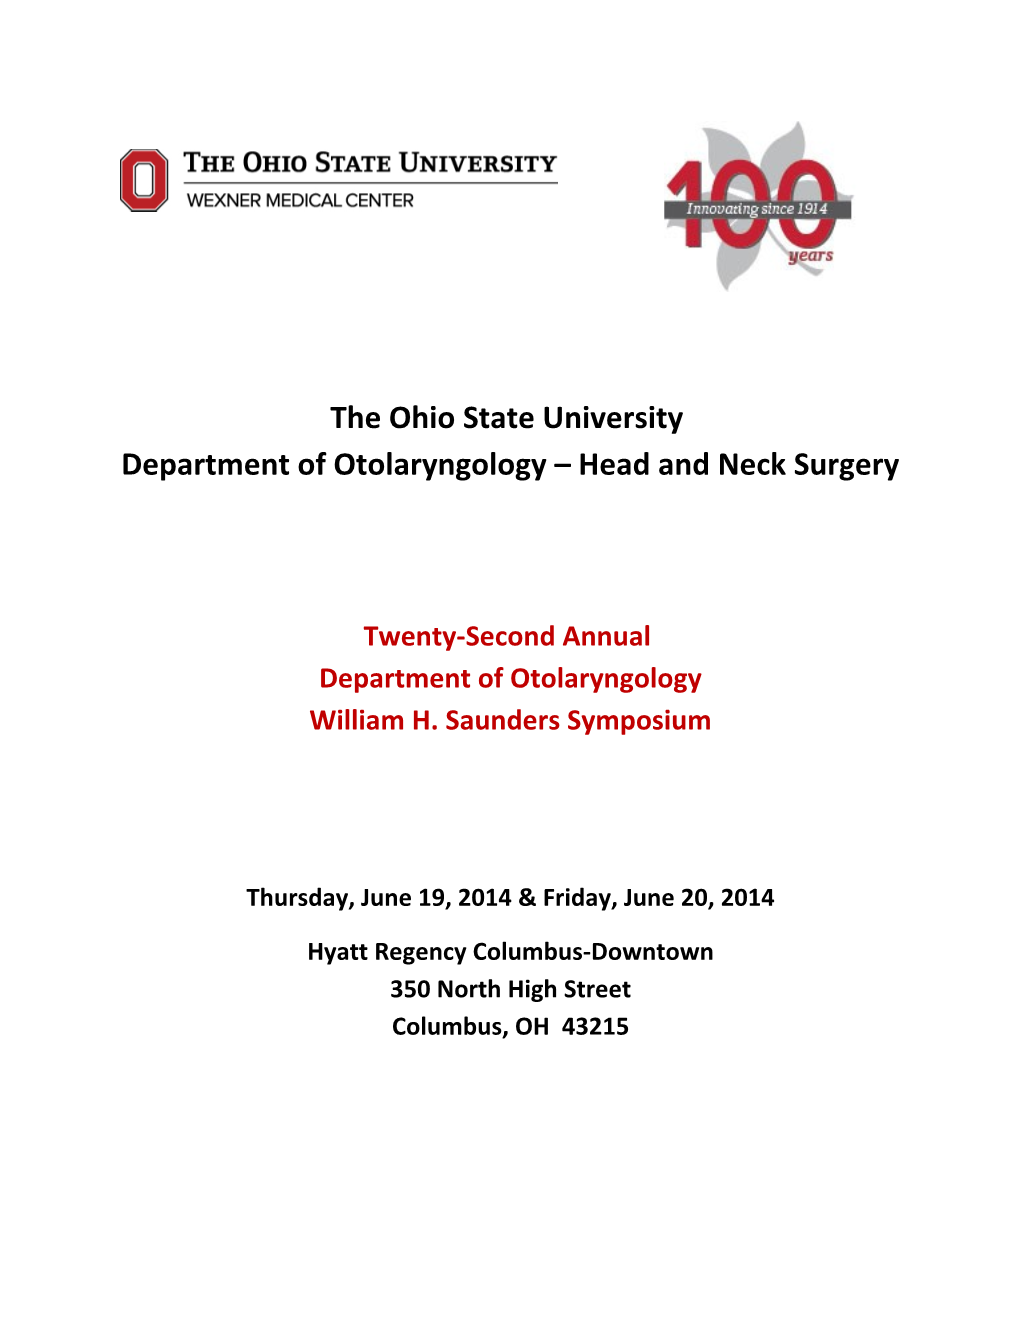 The Ohio State University Department of Otolaryngology Head and Neck Surgery